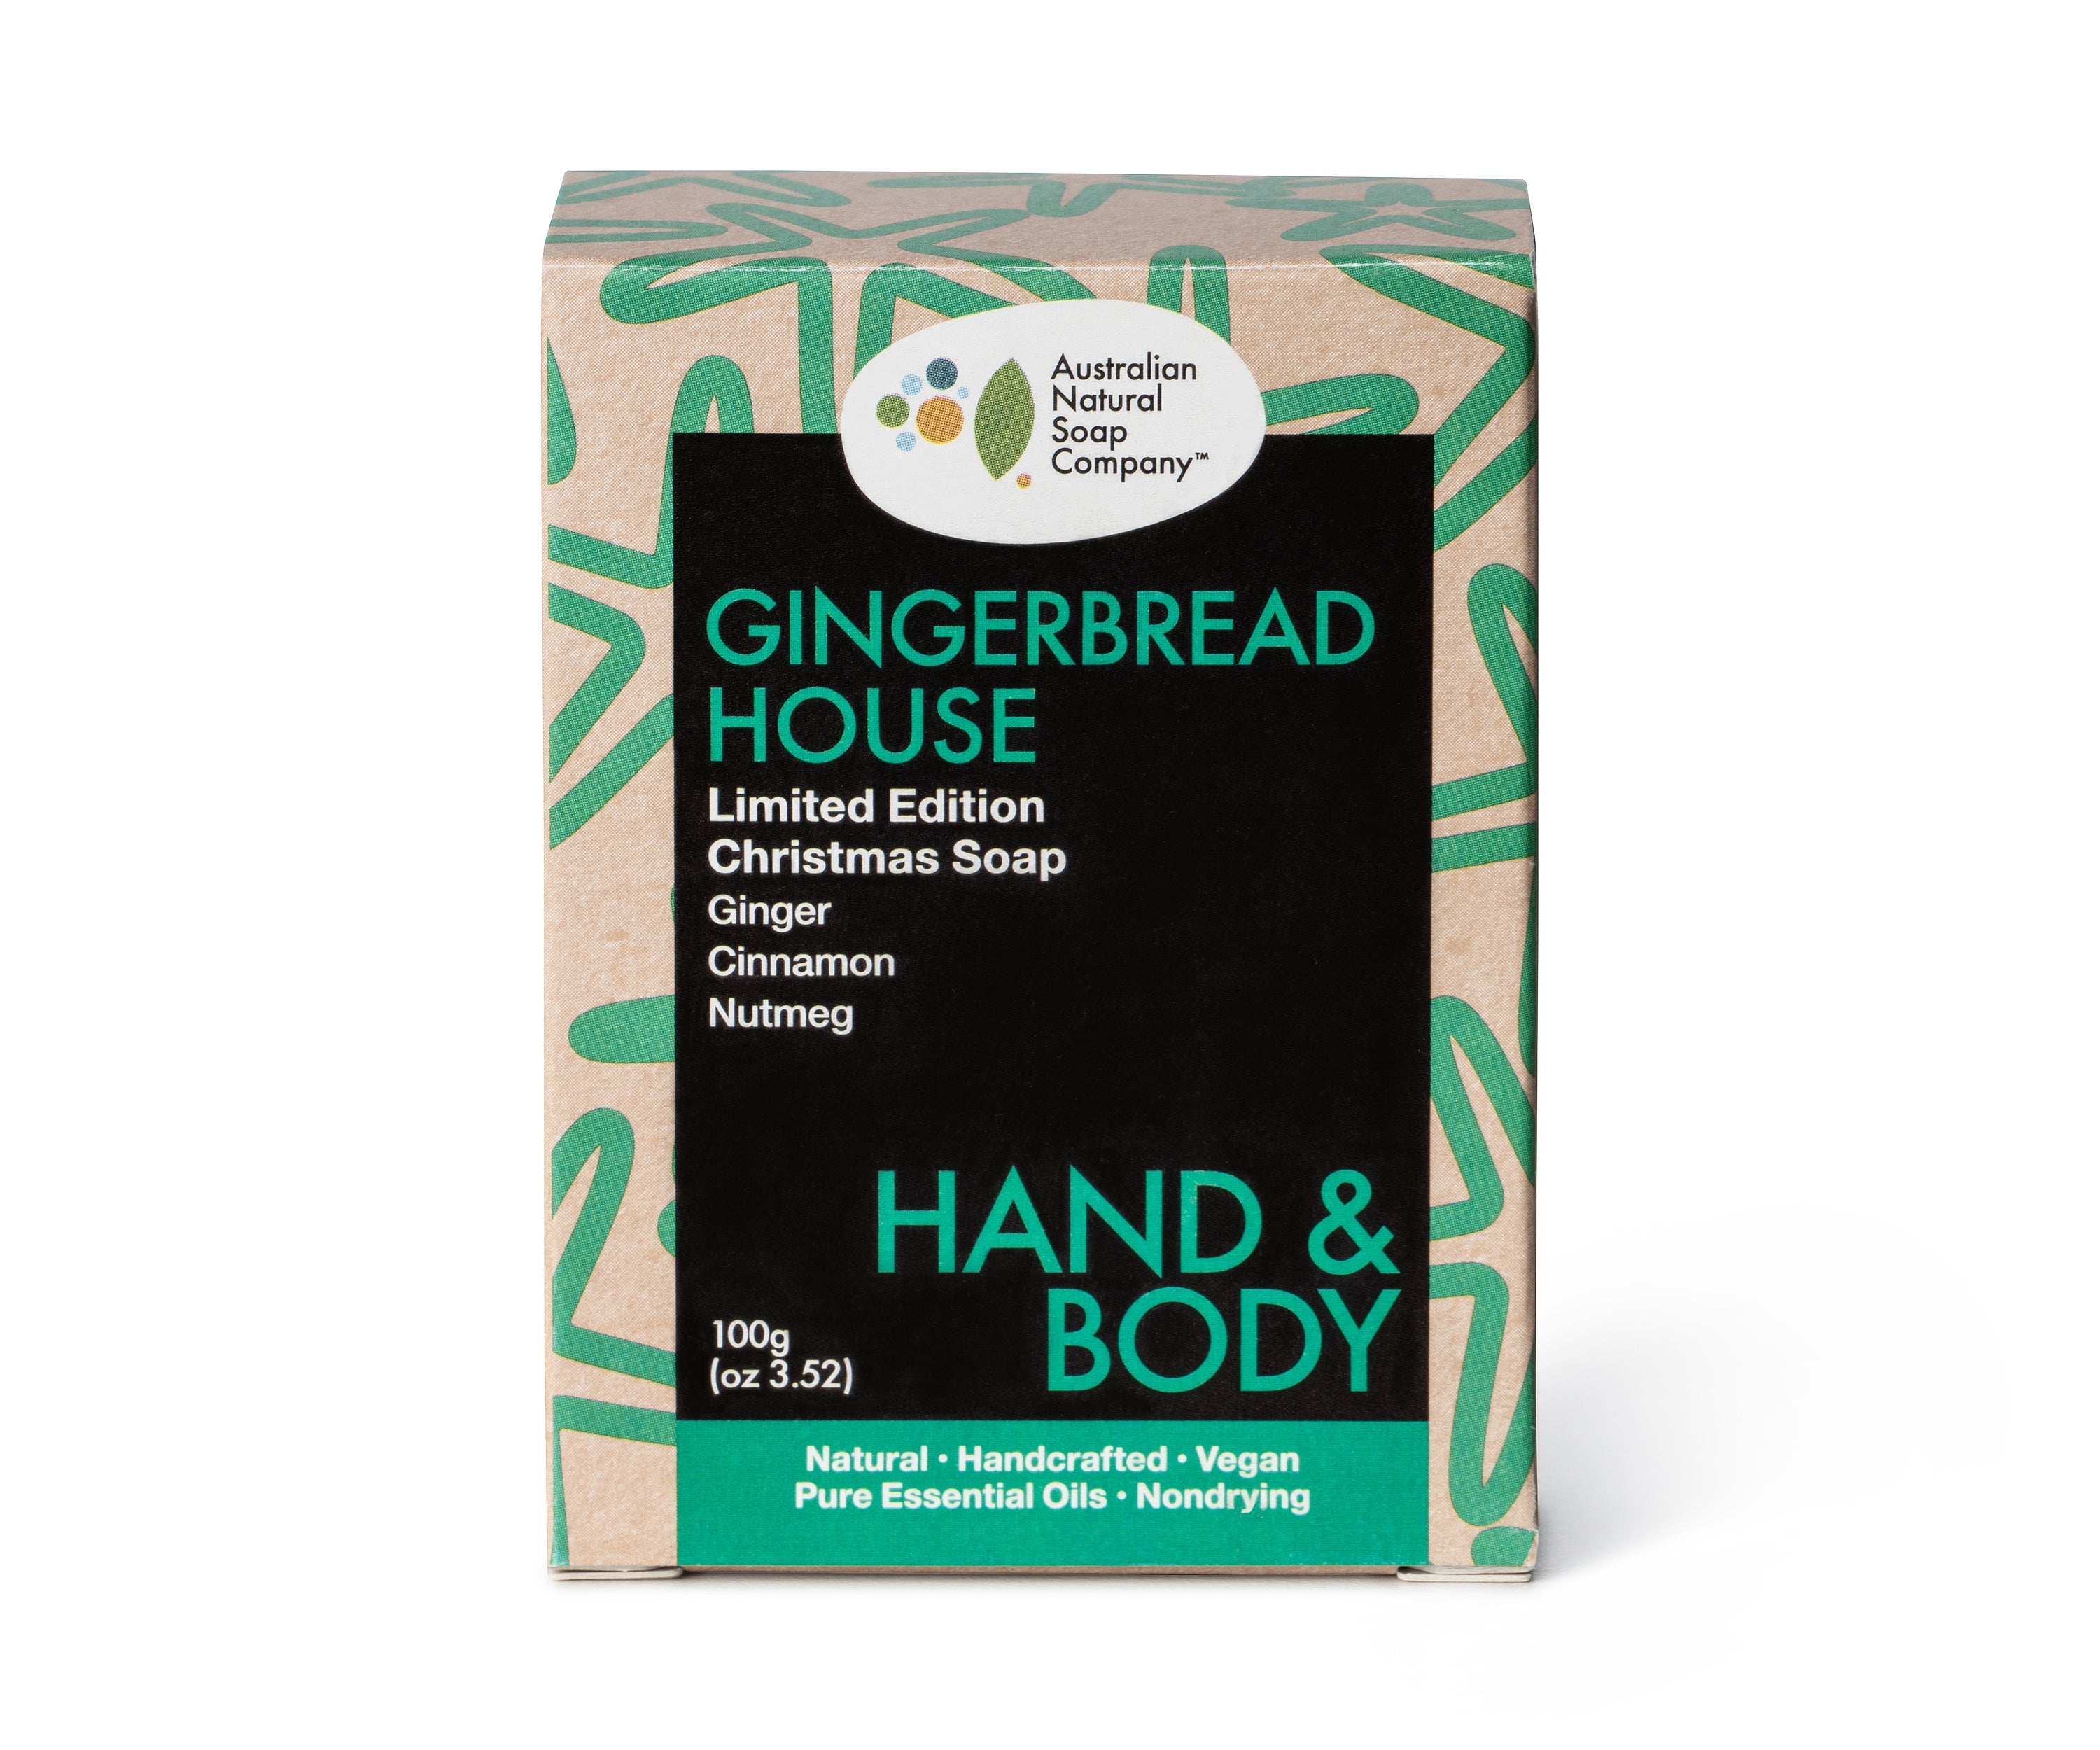 The Australian Natural Co Hand & Body - Christmas Edition Gingerbread House 100g